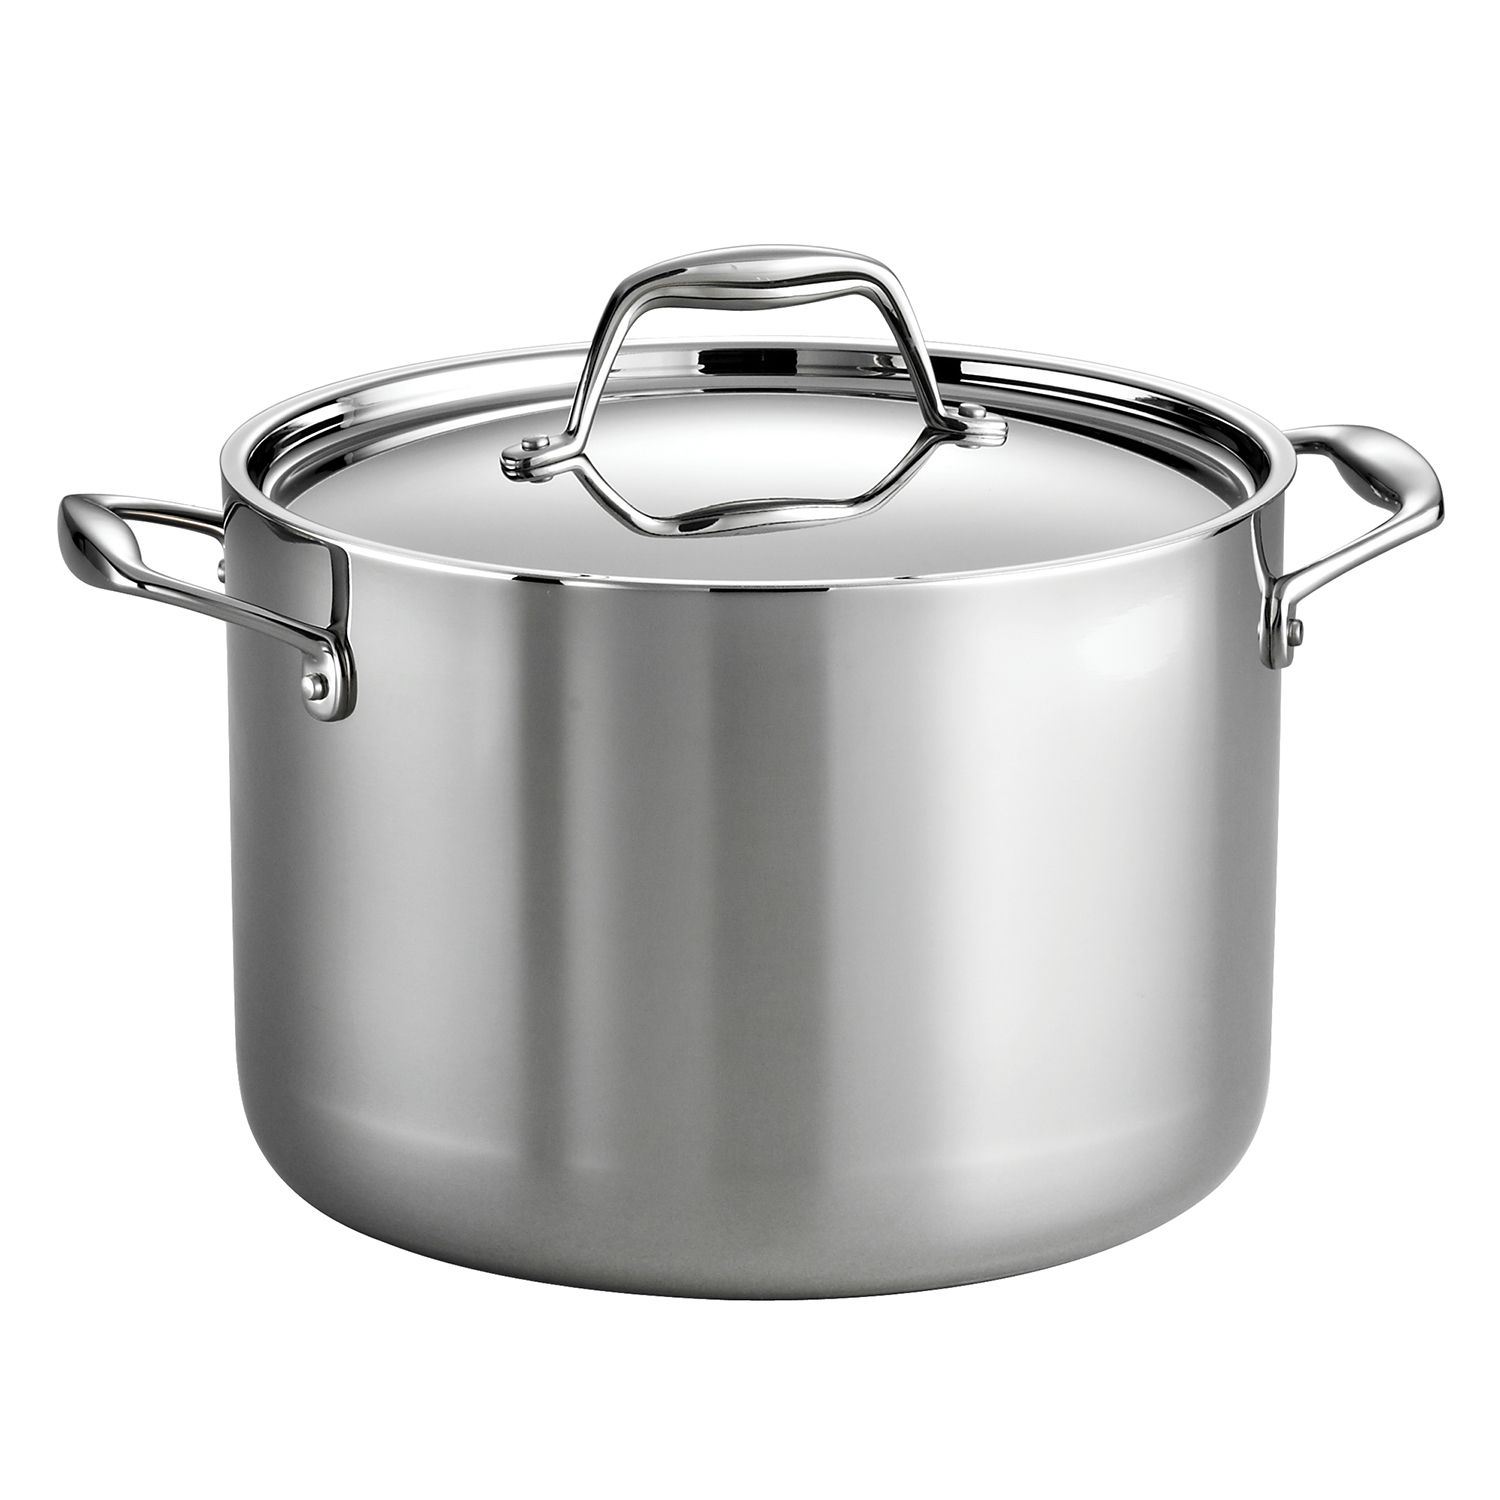 BUTIFULSIC Stainless Steel Griddle Cooking Pot Stainless Steel Stock Pot  Wok Stainless Steel Big pots for Cooking Steel Pans for Cooking Kitchen